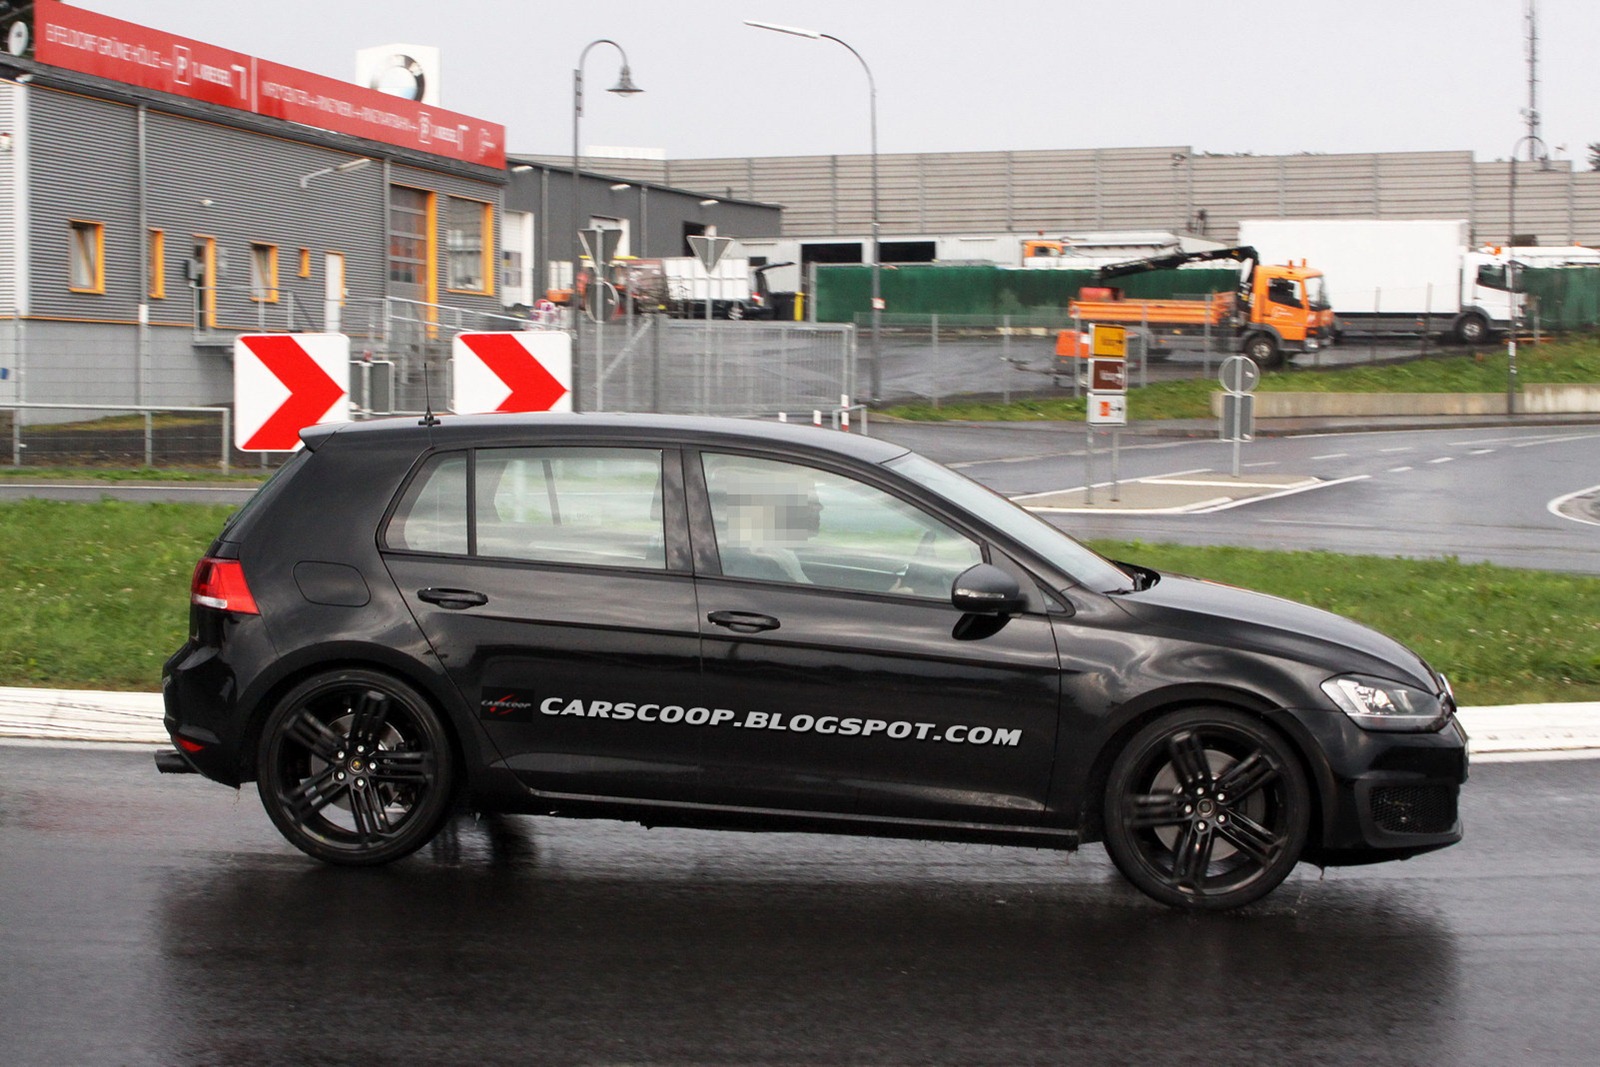 Is this the new Mk7 Golf R?